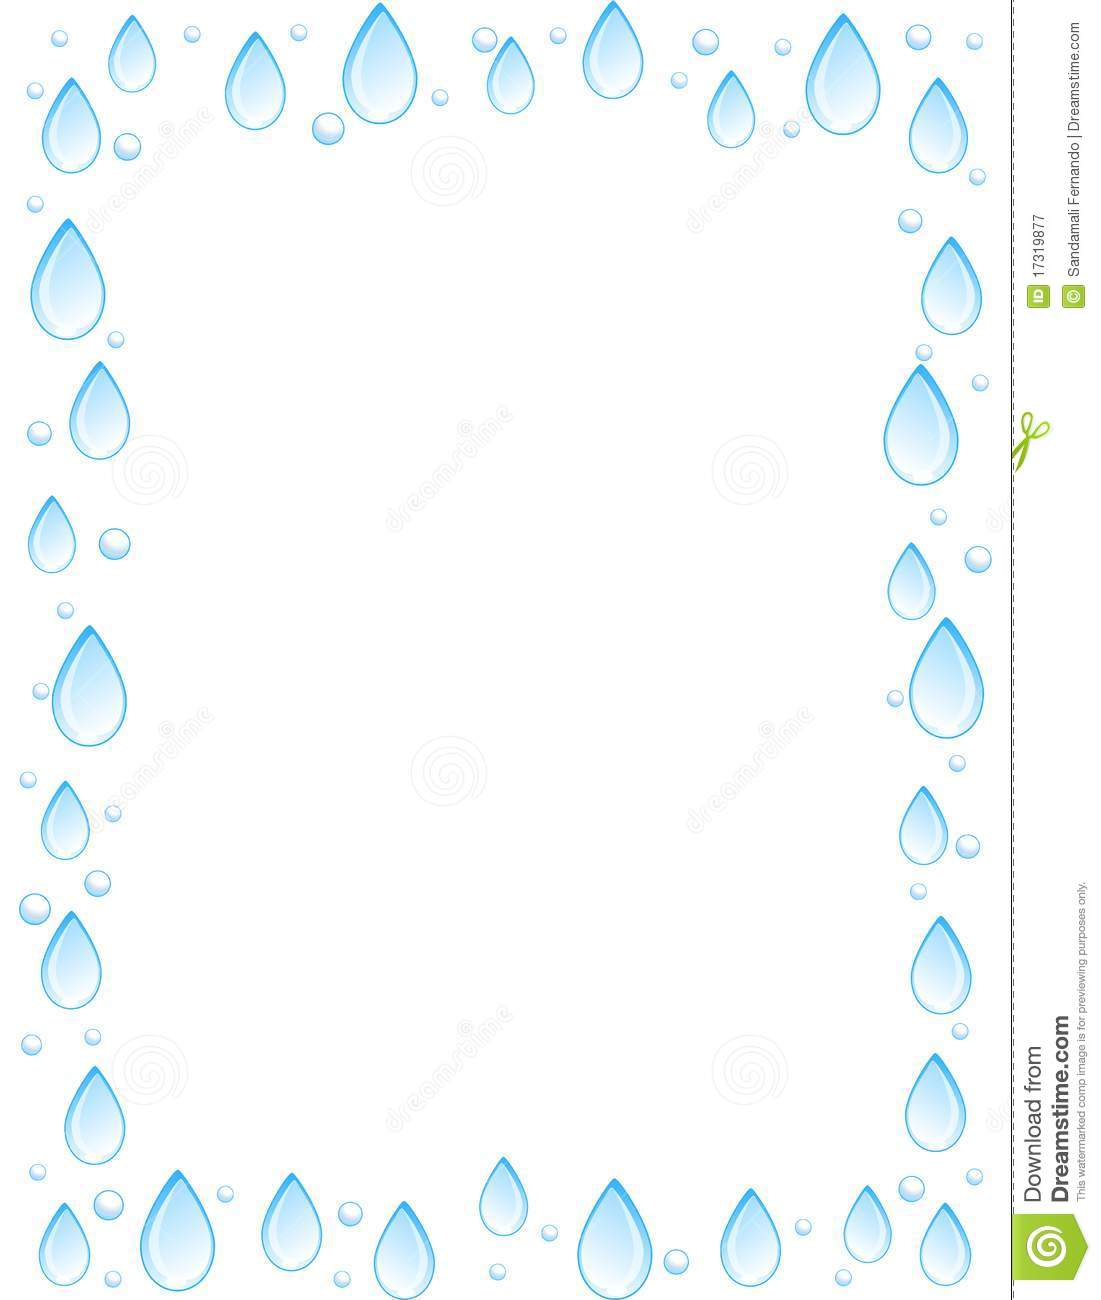 Blue Water Drops Border   Frame  Nature Border   Vector Available